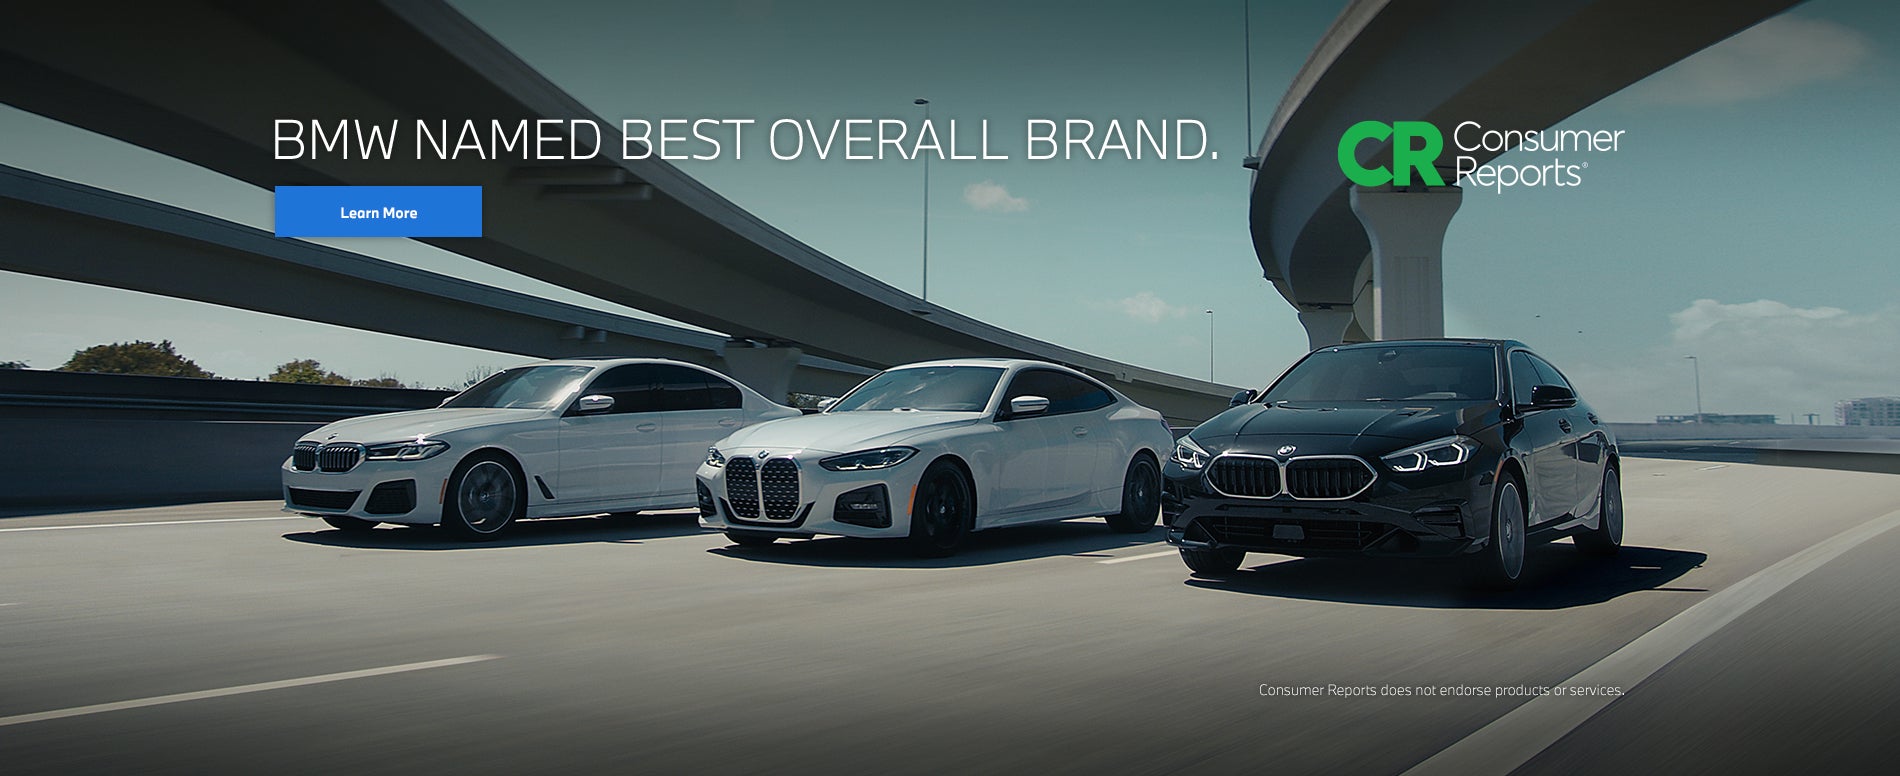 BMW NAMED BEST OVERALL BRAND